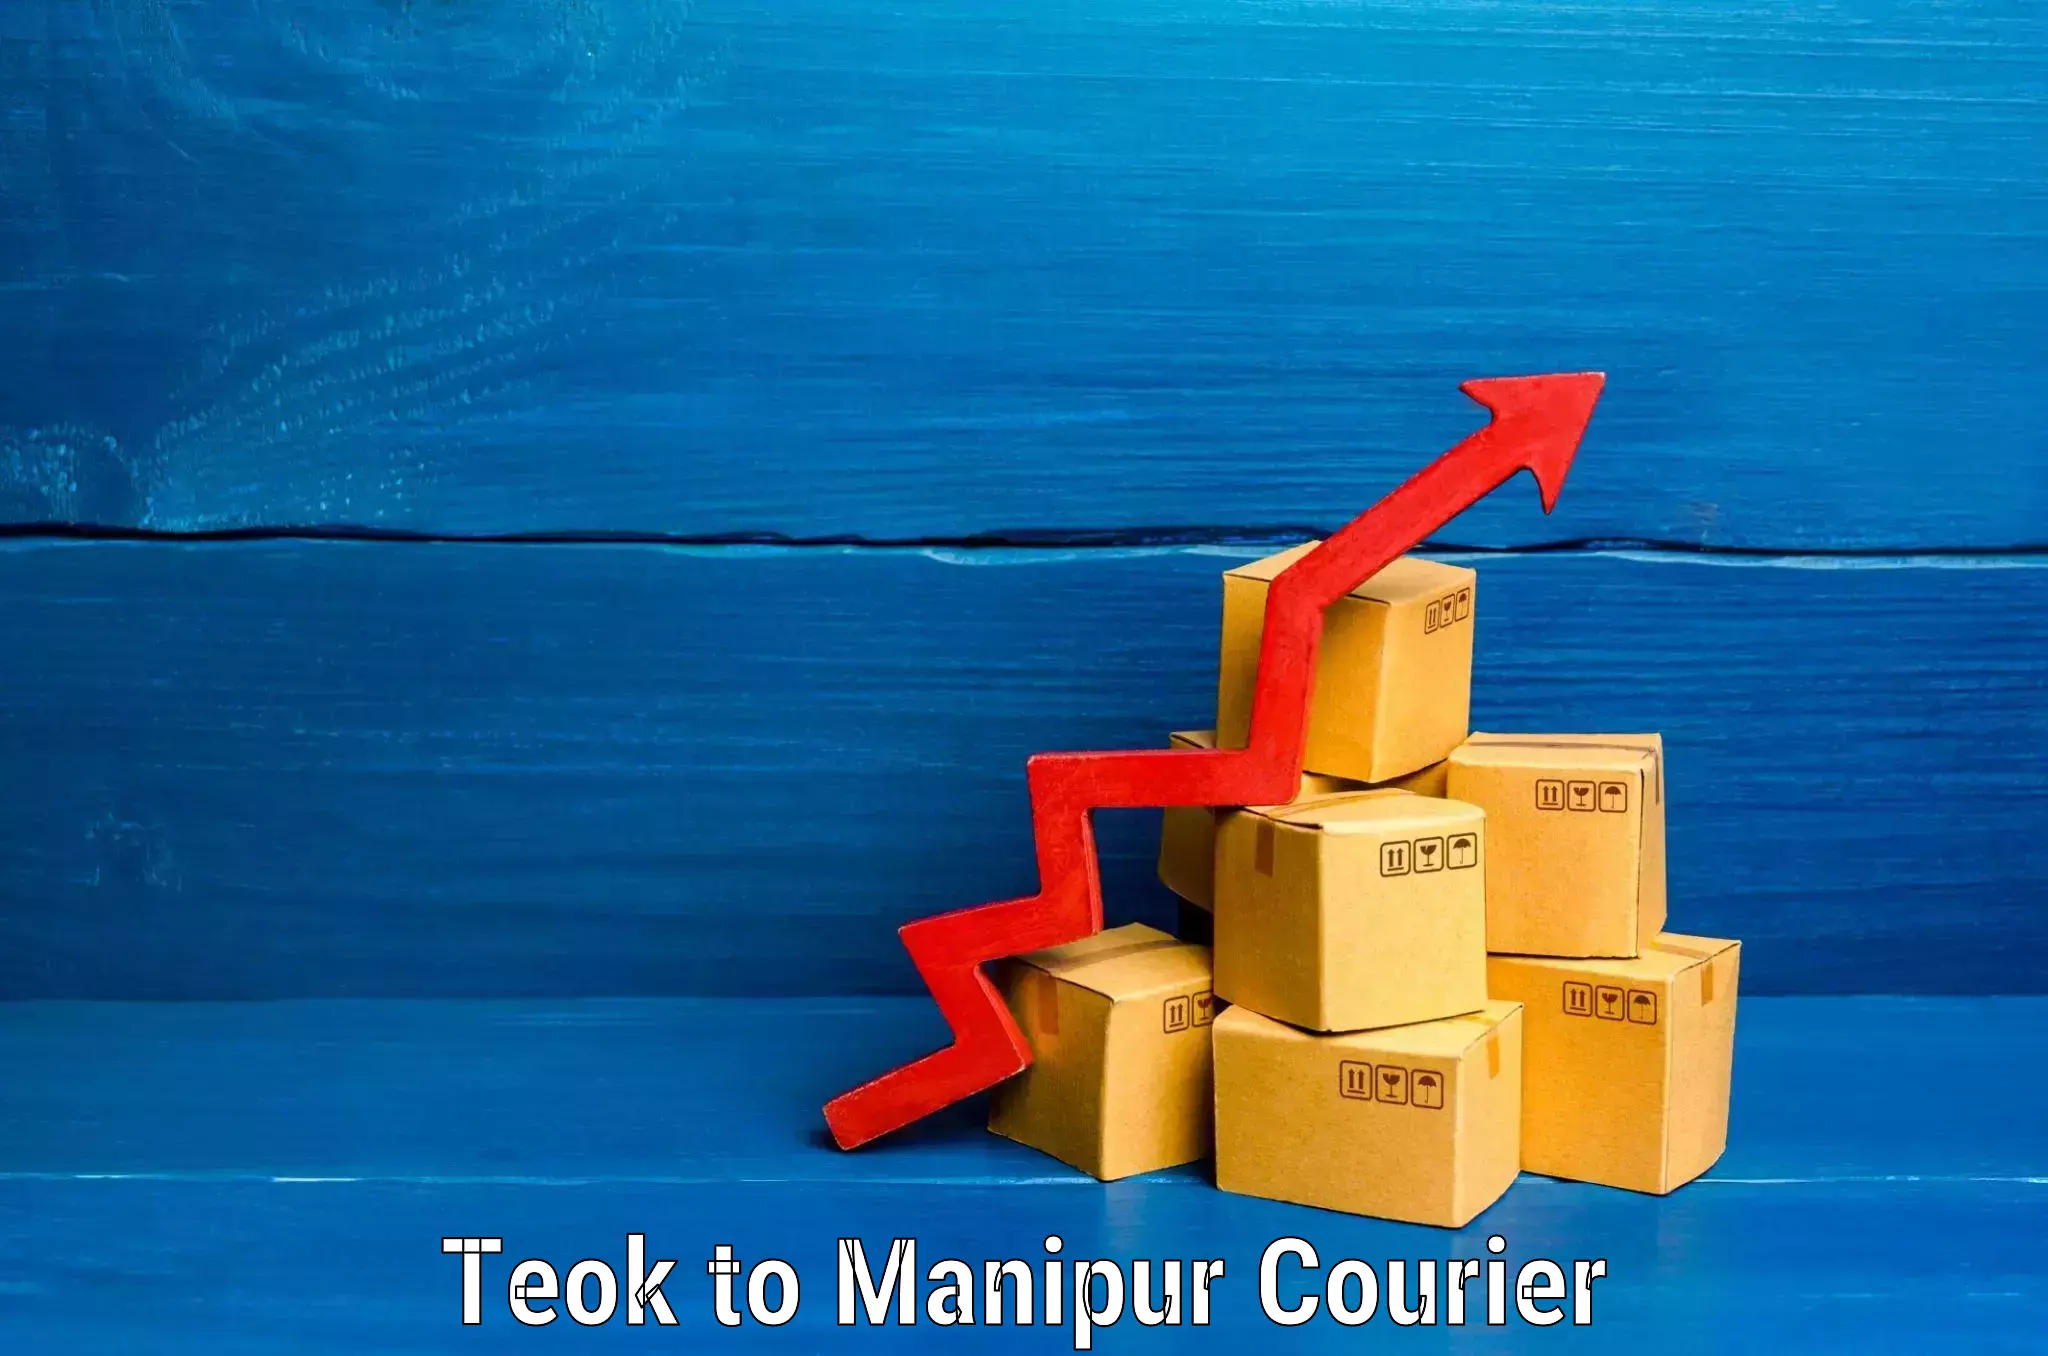 Luggage shipment specialists Teok to Manipur